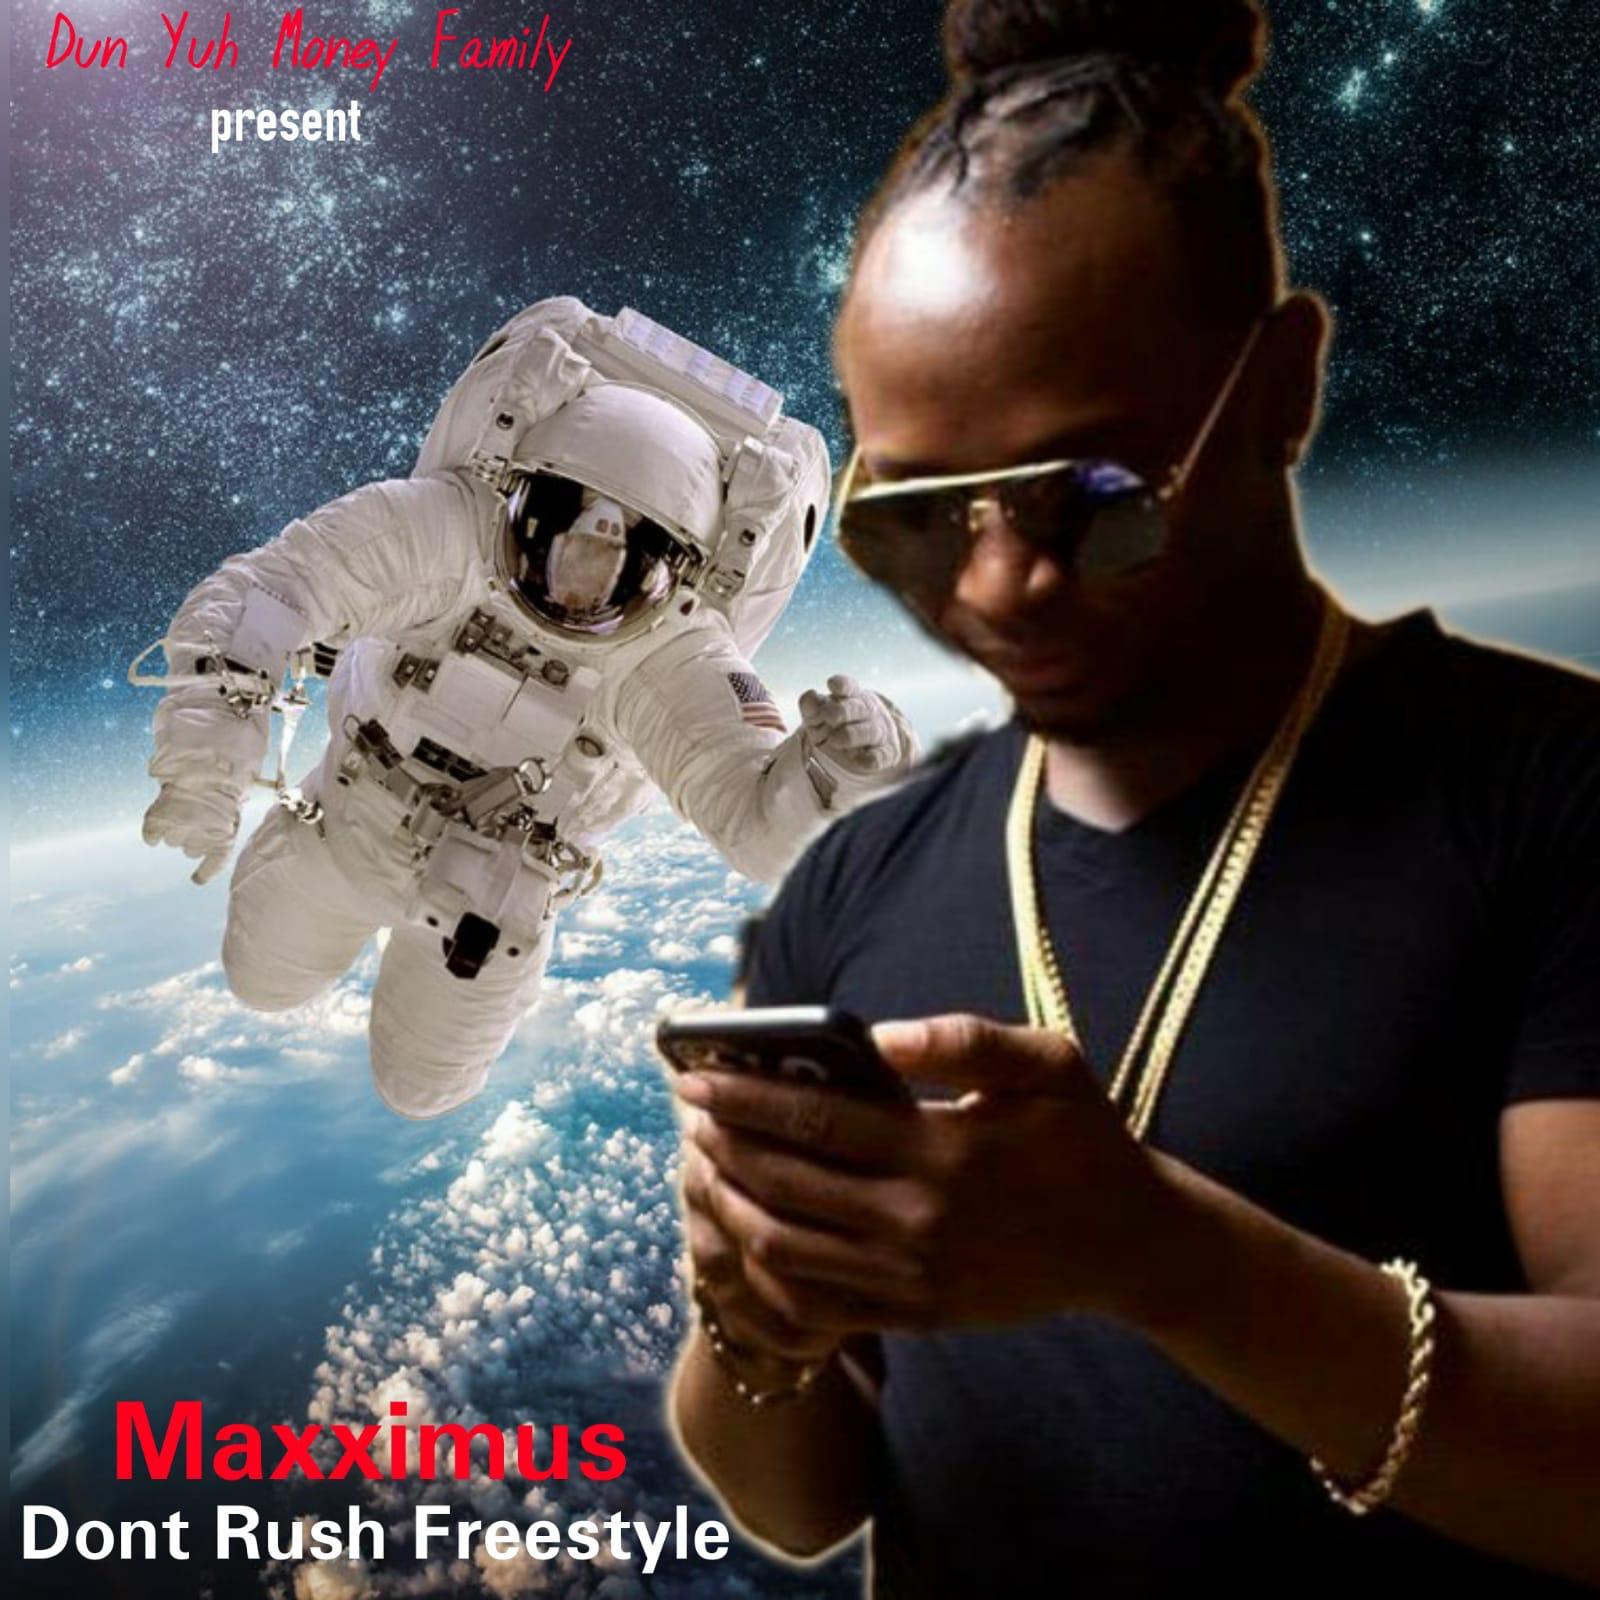 Don't Rush. The west side freestyle dj max star